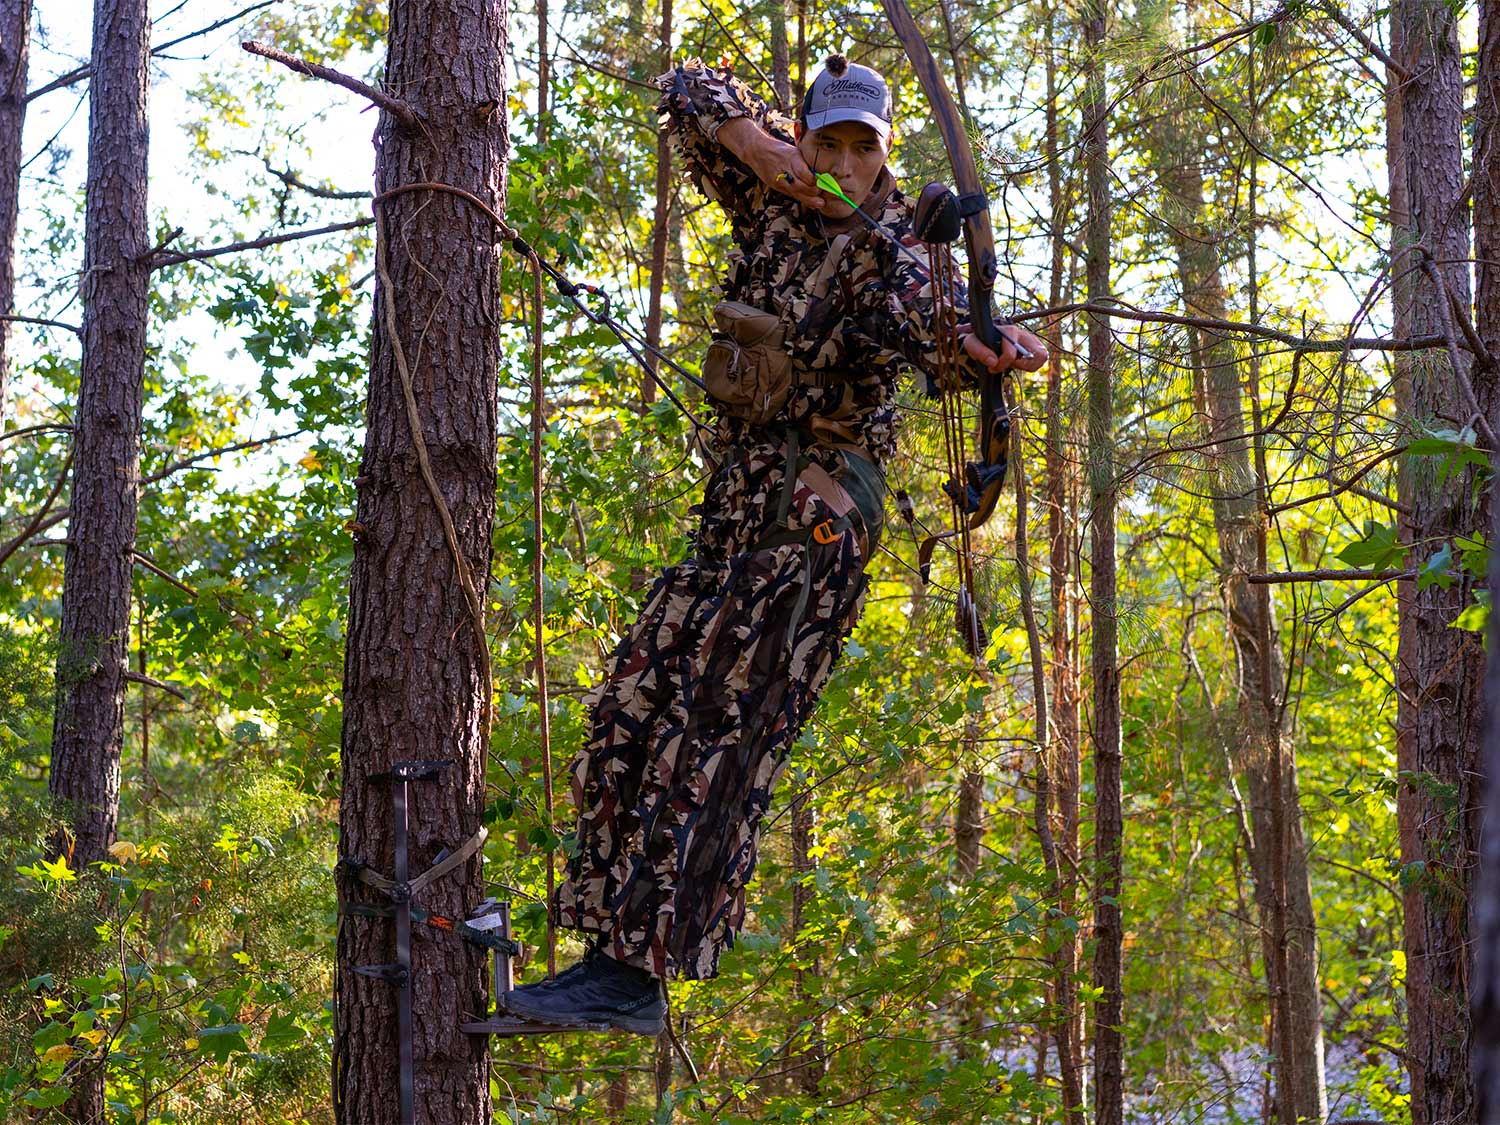 Shooting from a tree saddle 